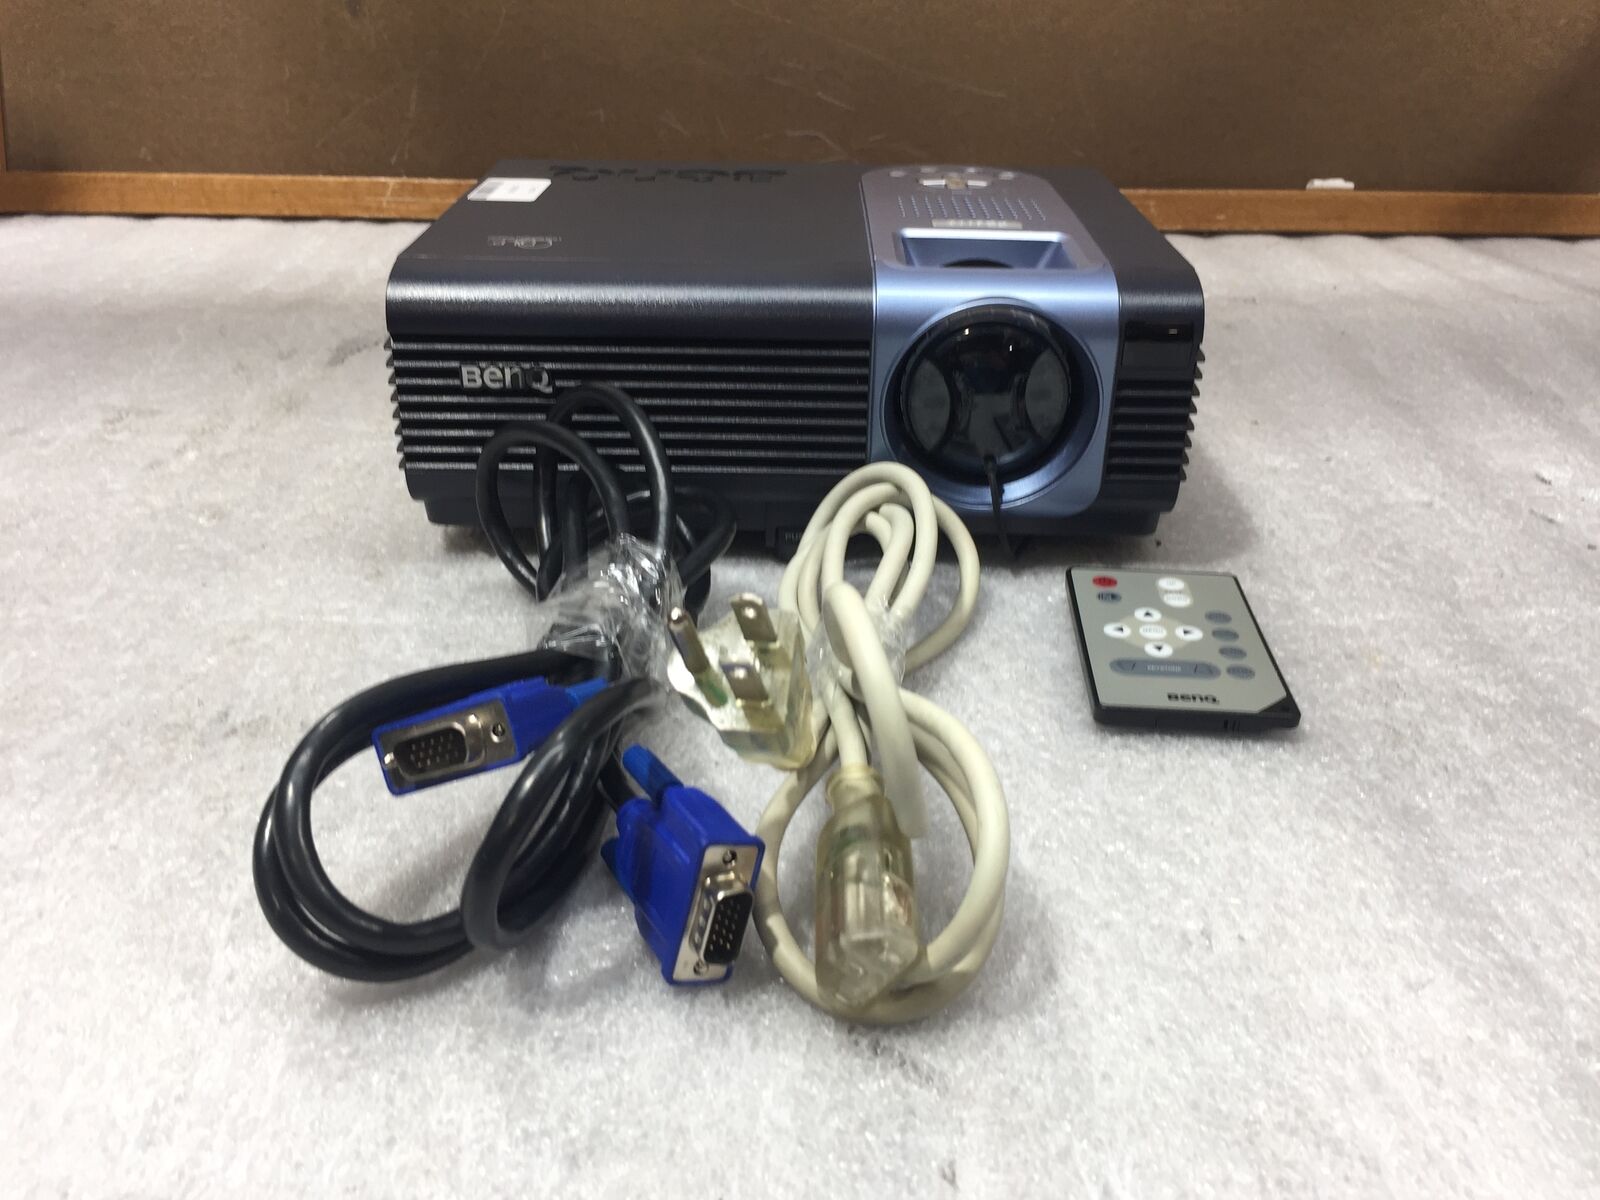 BenQ DLP Home Theater Projector w/ case and cables 1235 Lamp Hours TESTED